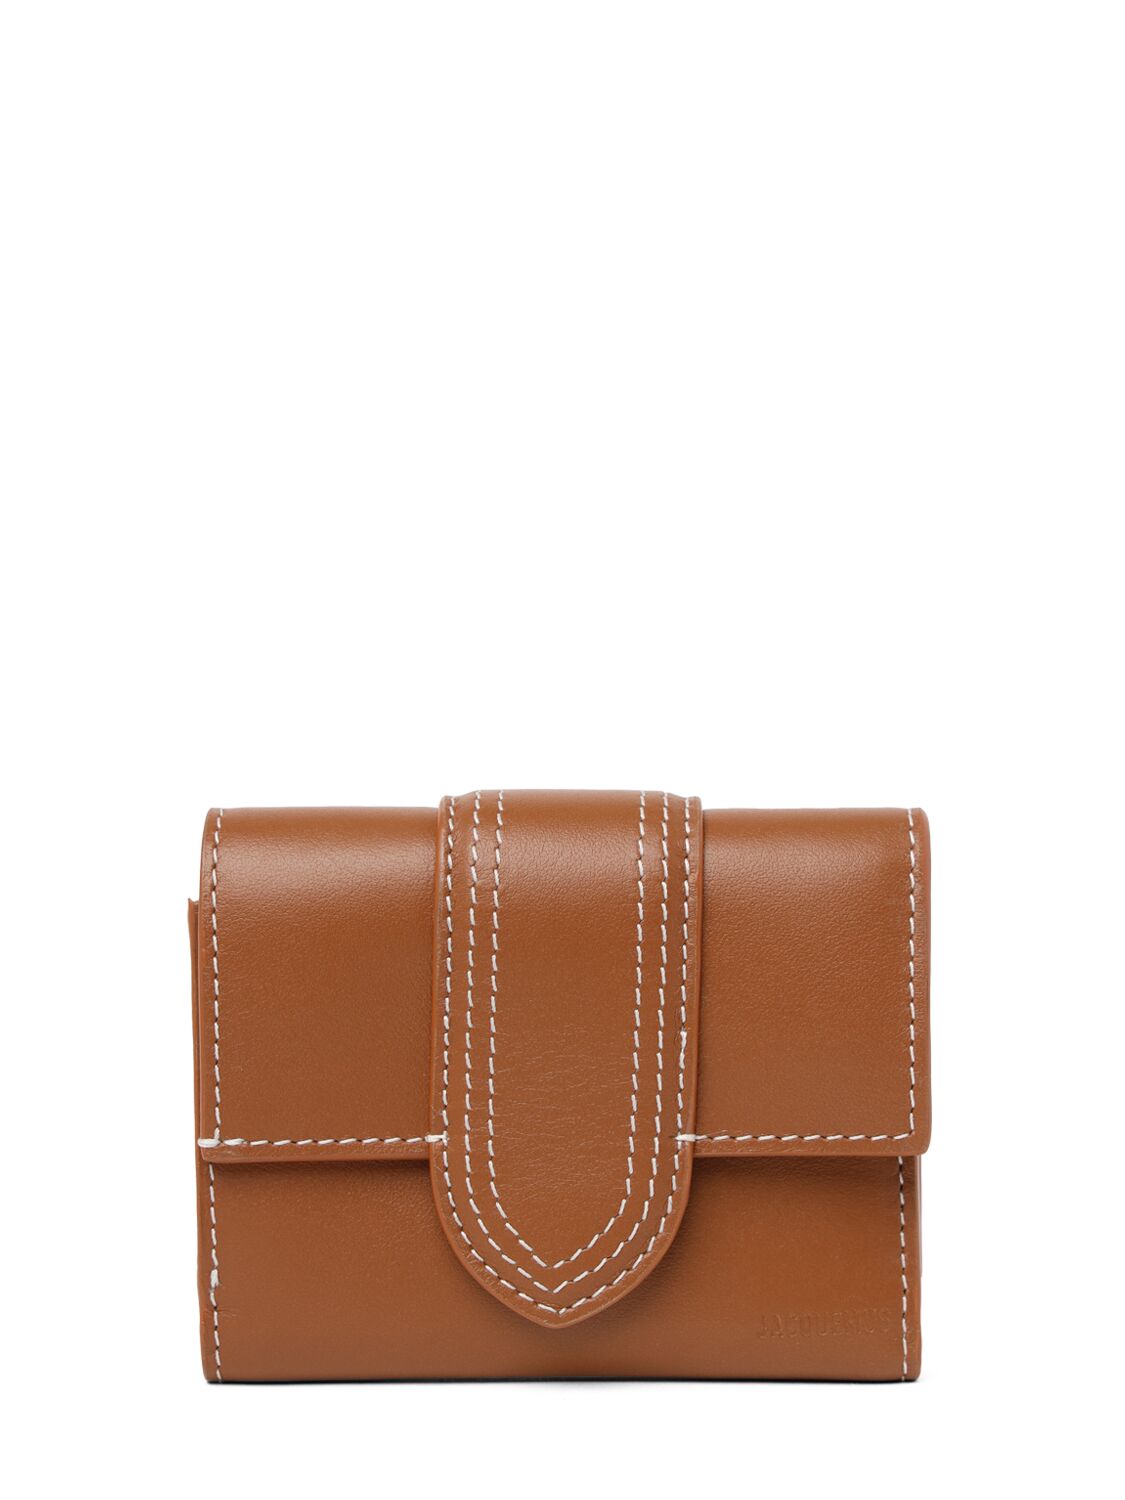 Jacquemus Le Compact Bambino Leather Wallet In Light Brown 2